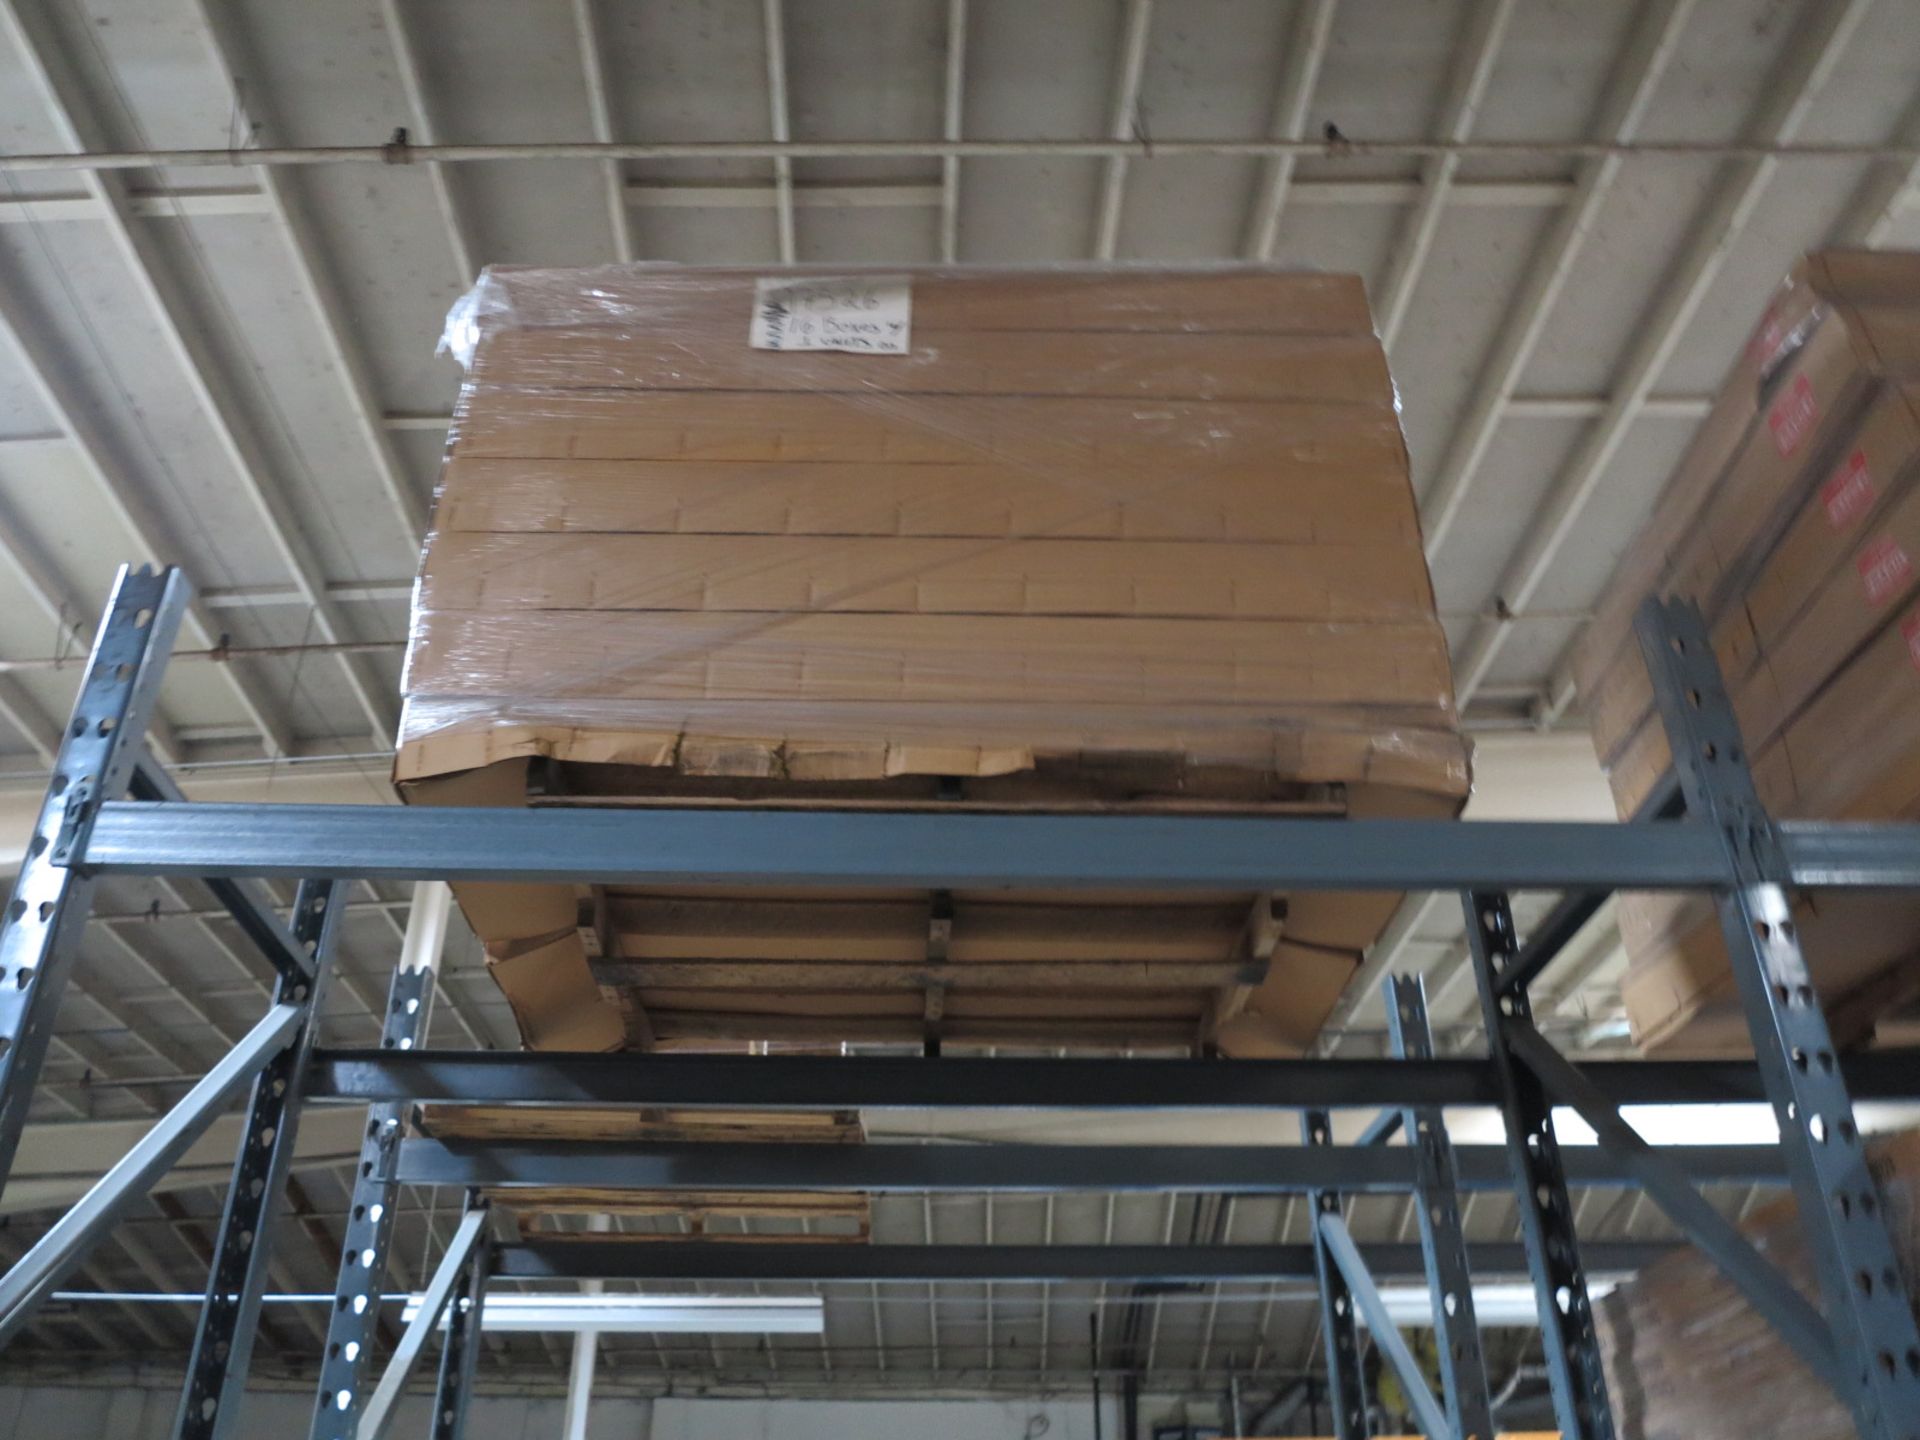 LOT - CONTENTS OF (2) SECTIONS OF PALLET RACK TO INCLUDE: ITEM # 26129, 2 WAY COSTUMER W CASTERS ( - Image 5 of 8